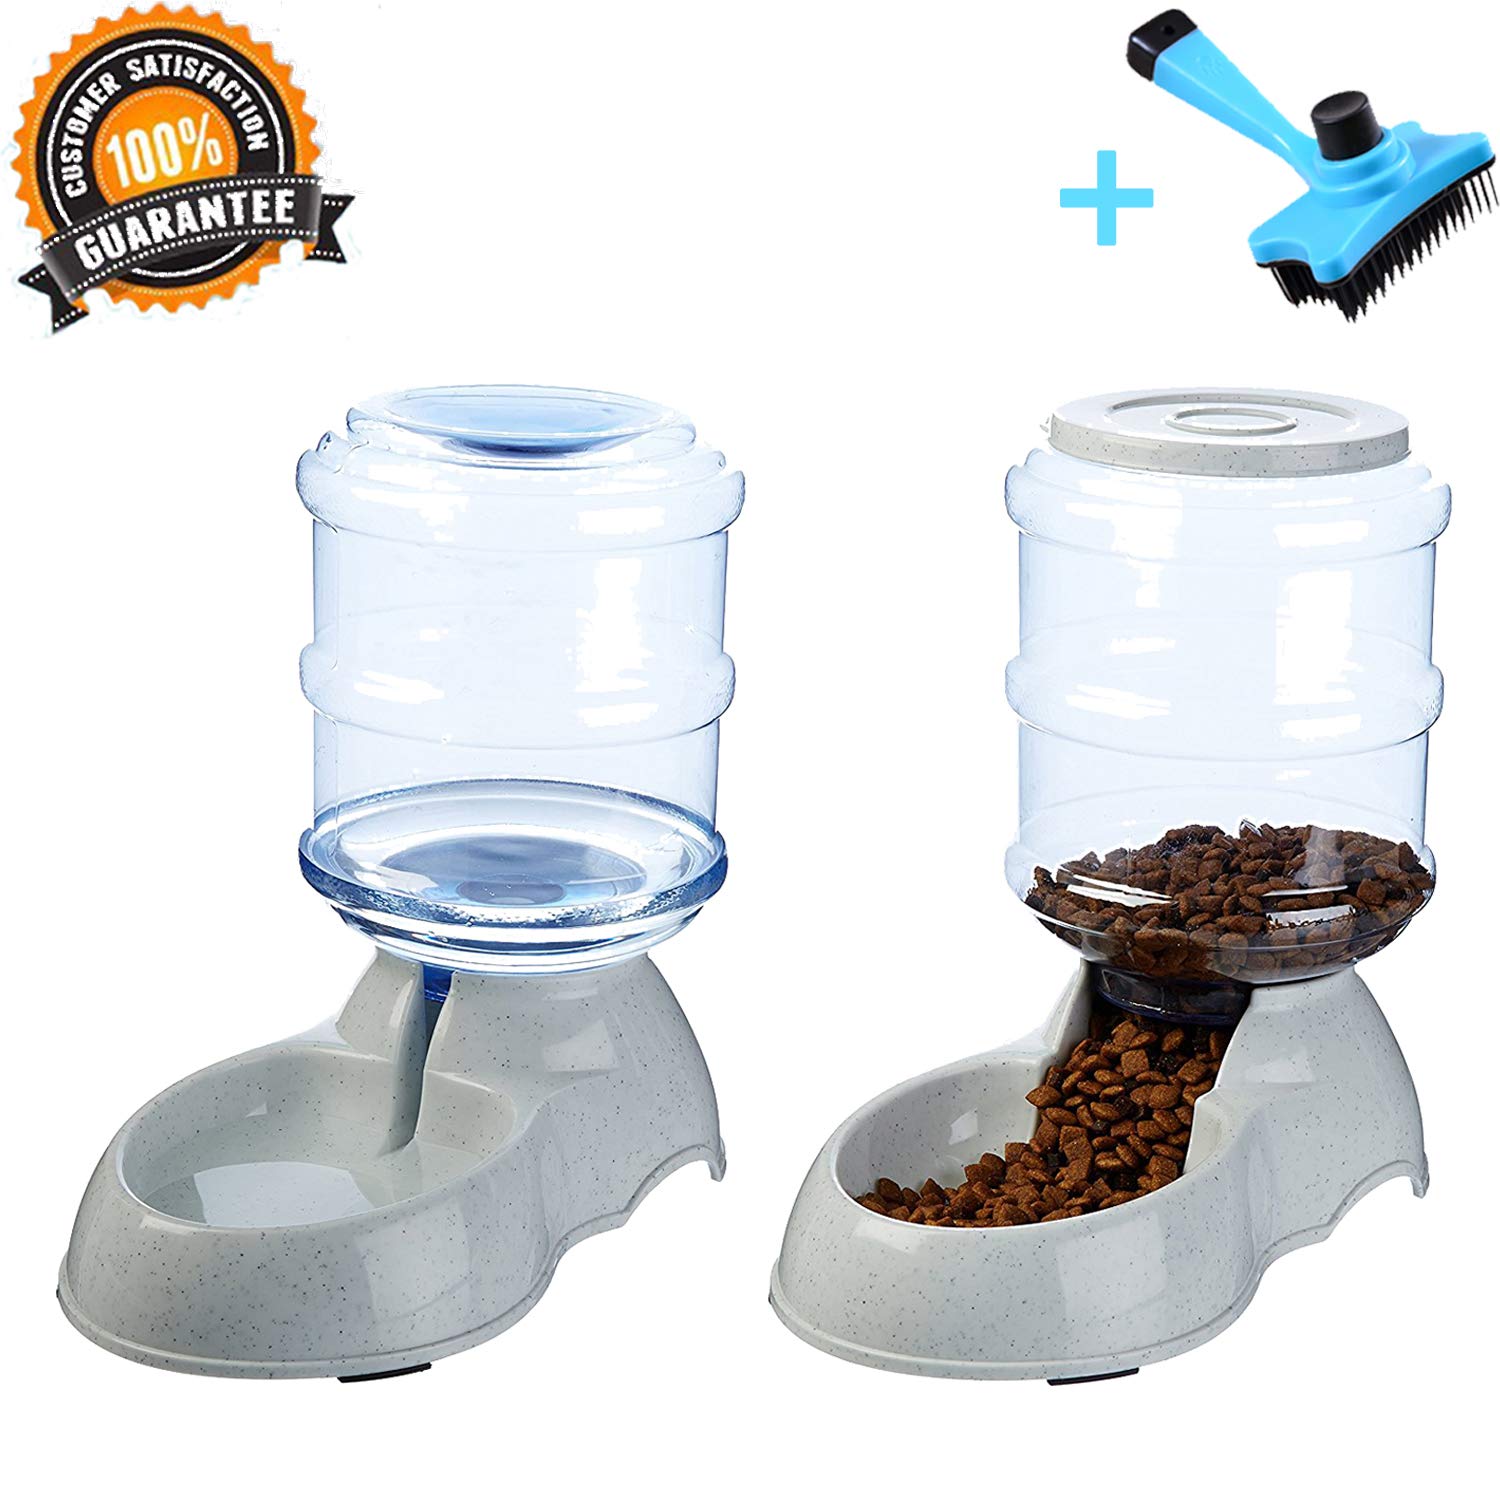 Ancaixin Automatic Feeder and Water Dispenser